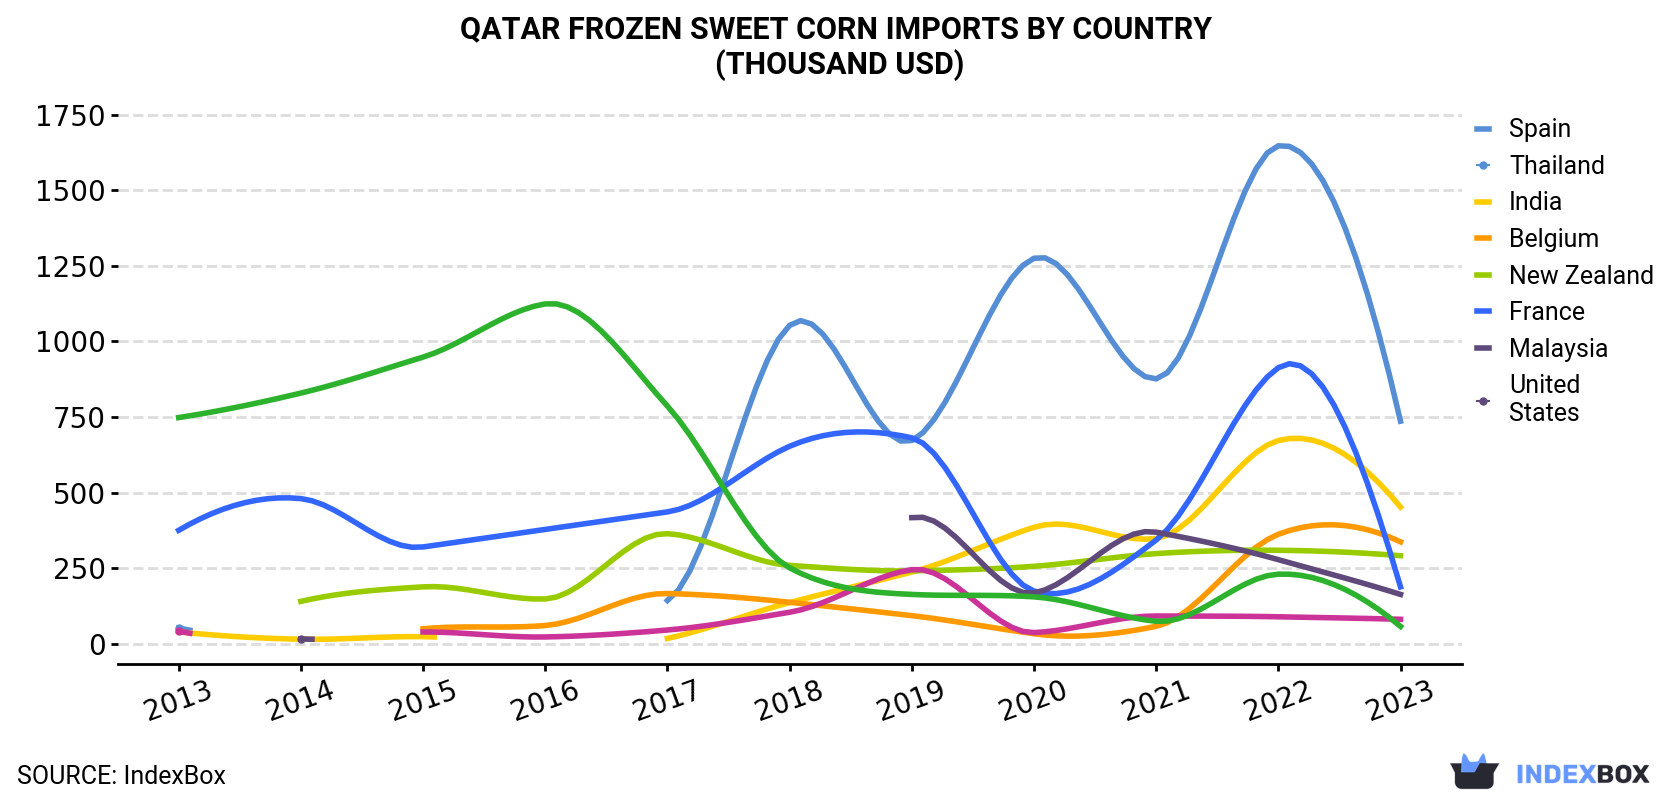 Qatar Frozen Sweet Corn Imports By Country (Thousand USD)